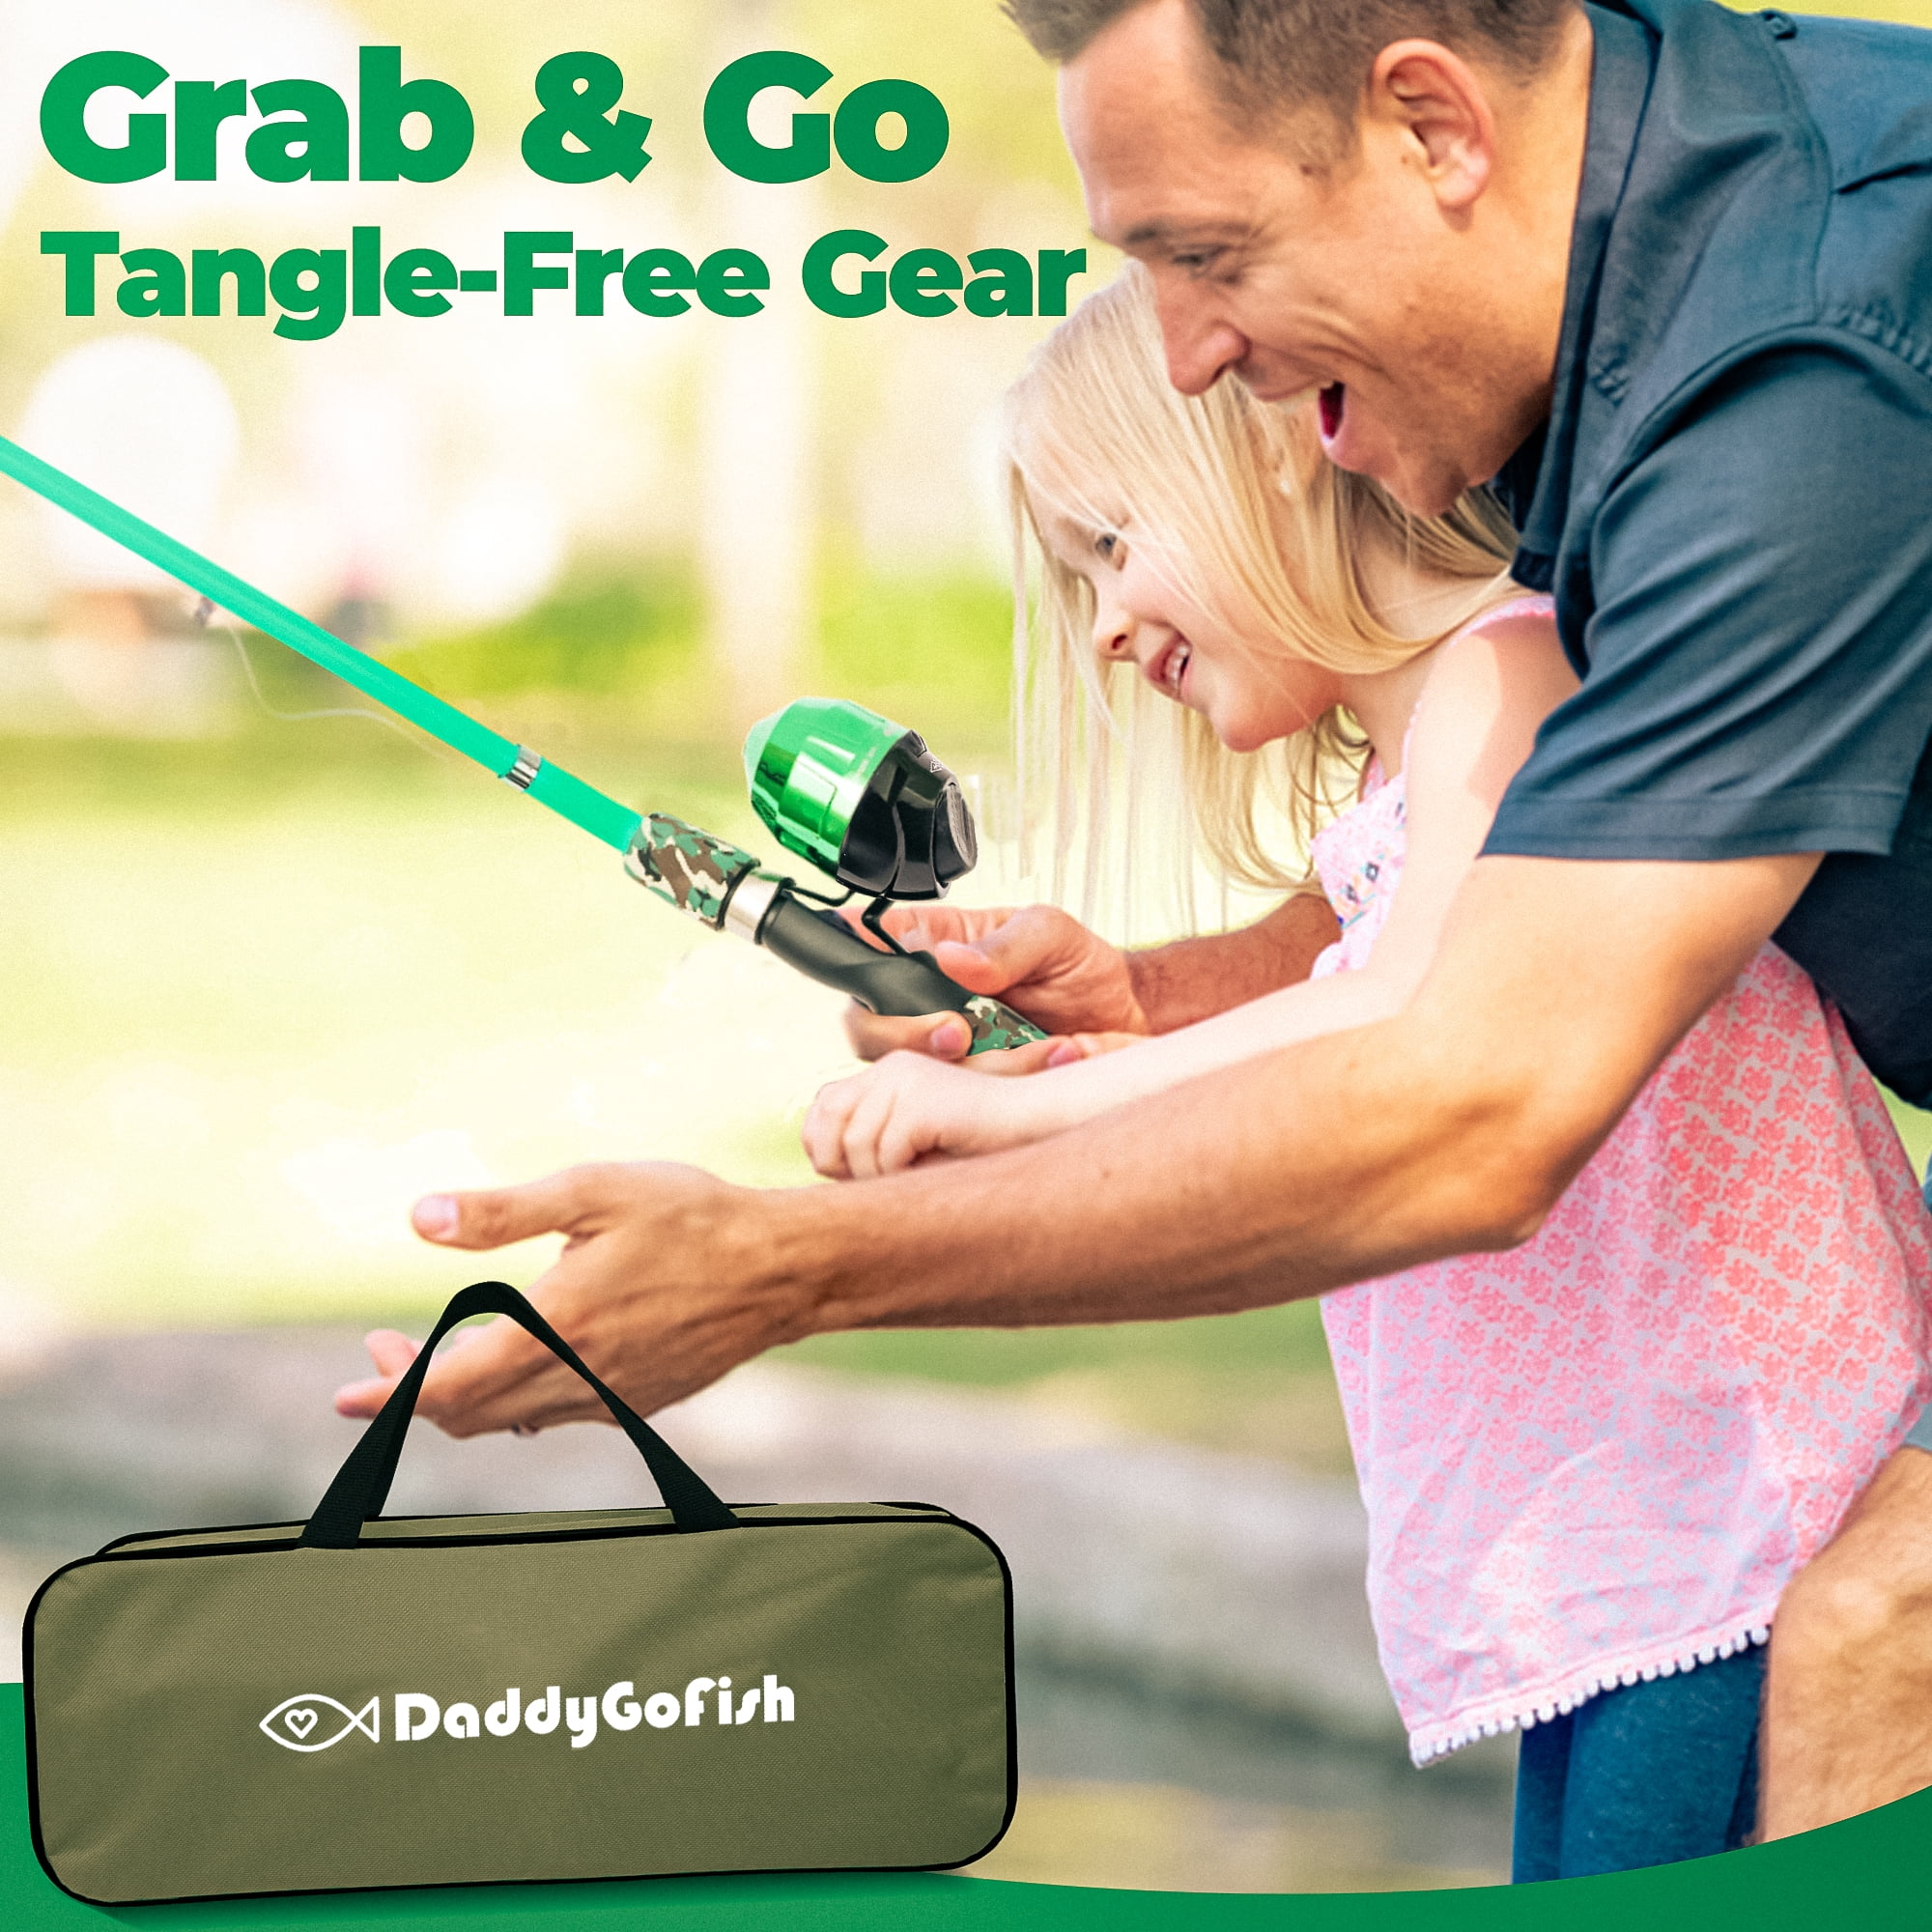 DaddyGoFish Kids Fishing Pole - Rod Reel Combo Tackle Box Starter Set - First Year Small Dock Gear Kit For Boys Girls Toddler Youth Age Beginner